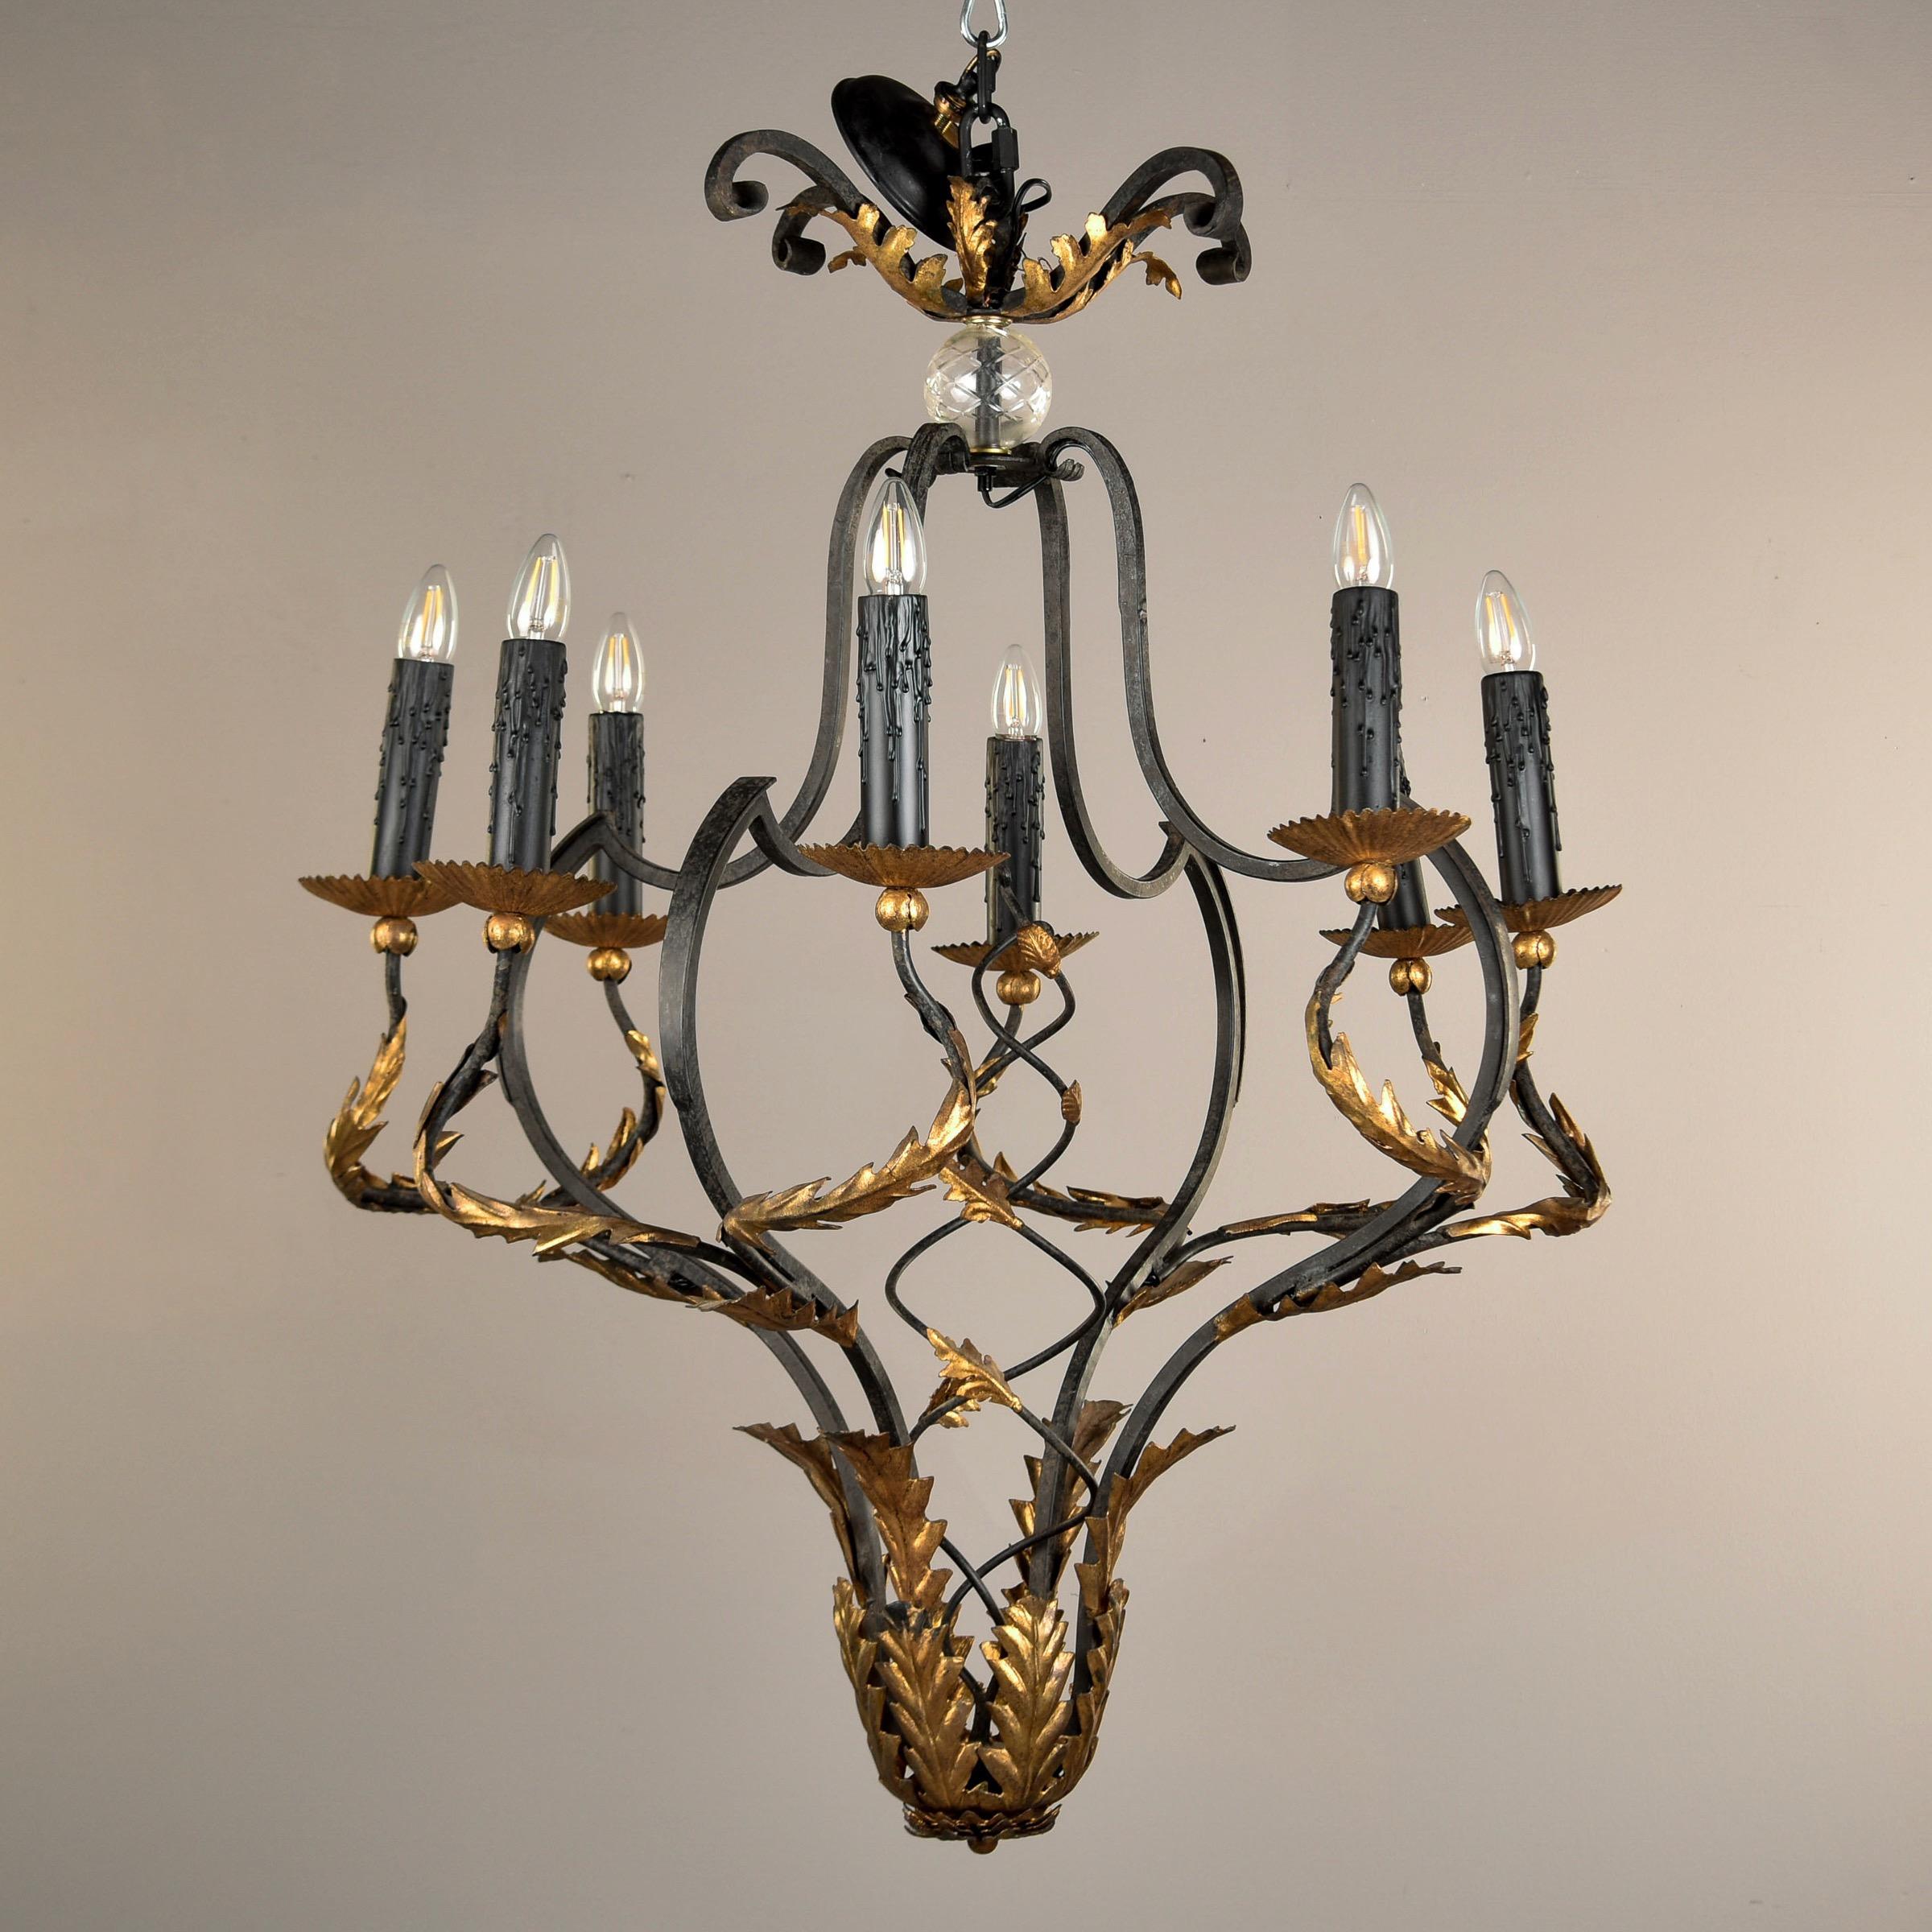 Mid century Italian eight light chandelier has a black iron frame with gilt metal fronds and detailing. Eight candle-style lights with standard sized sockets. Chandelier is 32” diameter and 43” tall. All wiring has been updated for US electrical